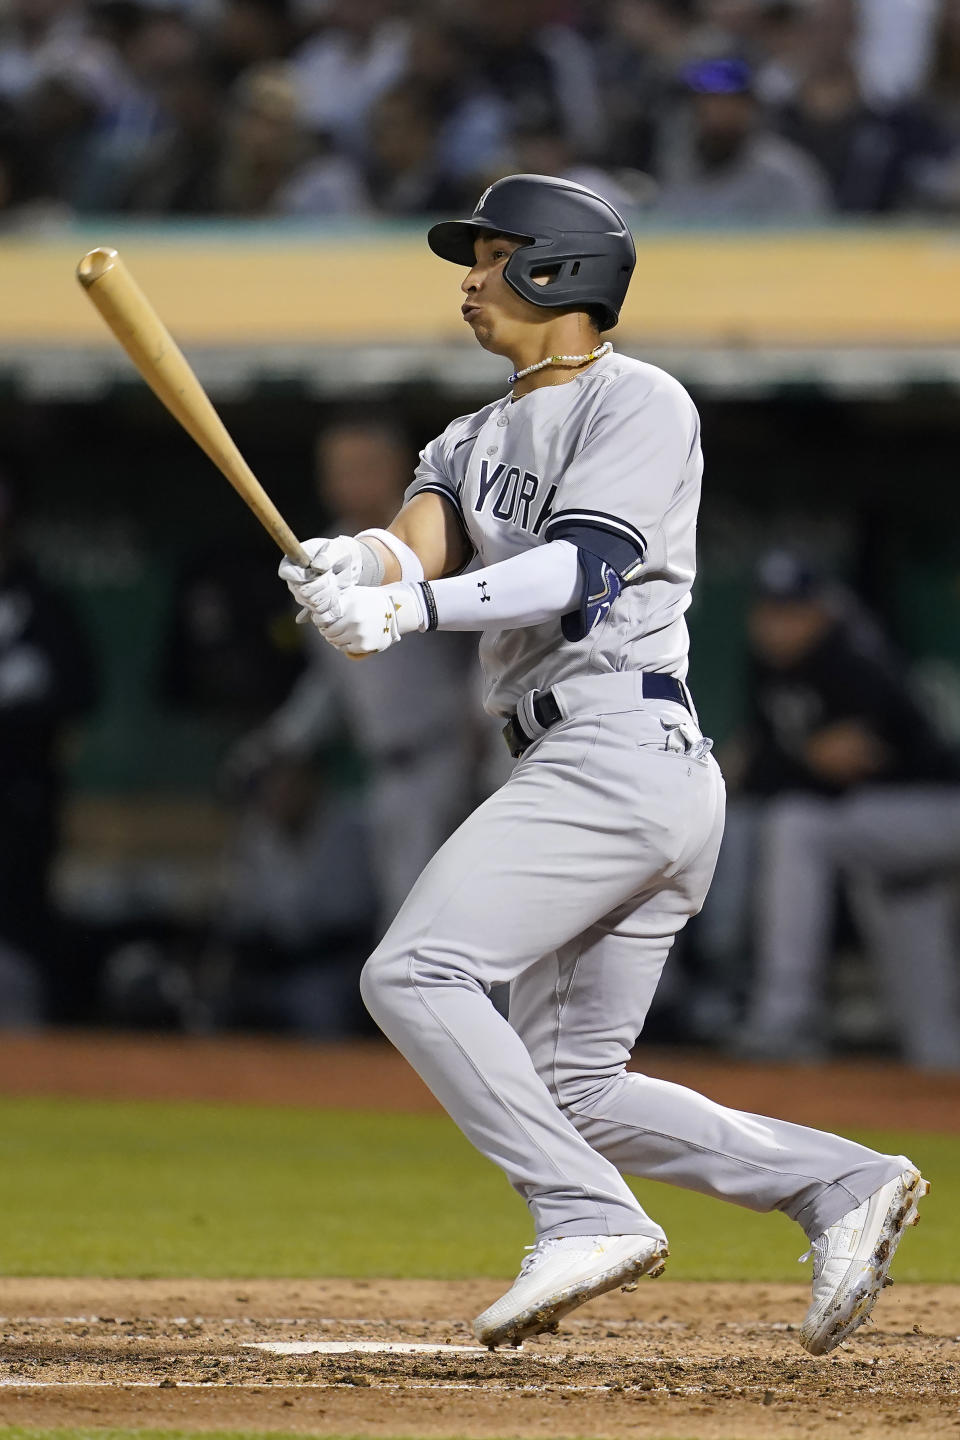 New York Yankees' Oswaldo Cabrera hits a single against the Oakland Athletics during the fifth inning of a baseball game in Oakland, Calif., Friday, Aug. 26, 2022. (AP Photo/Jeff Chiu)